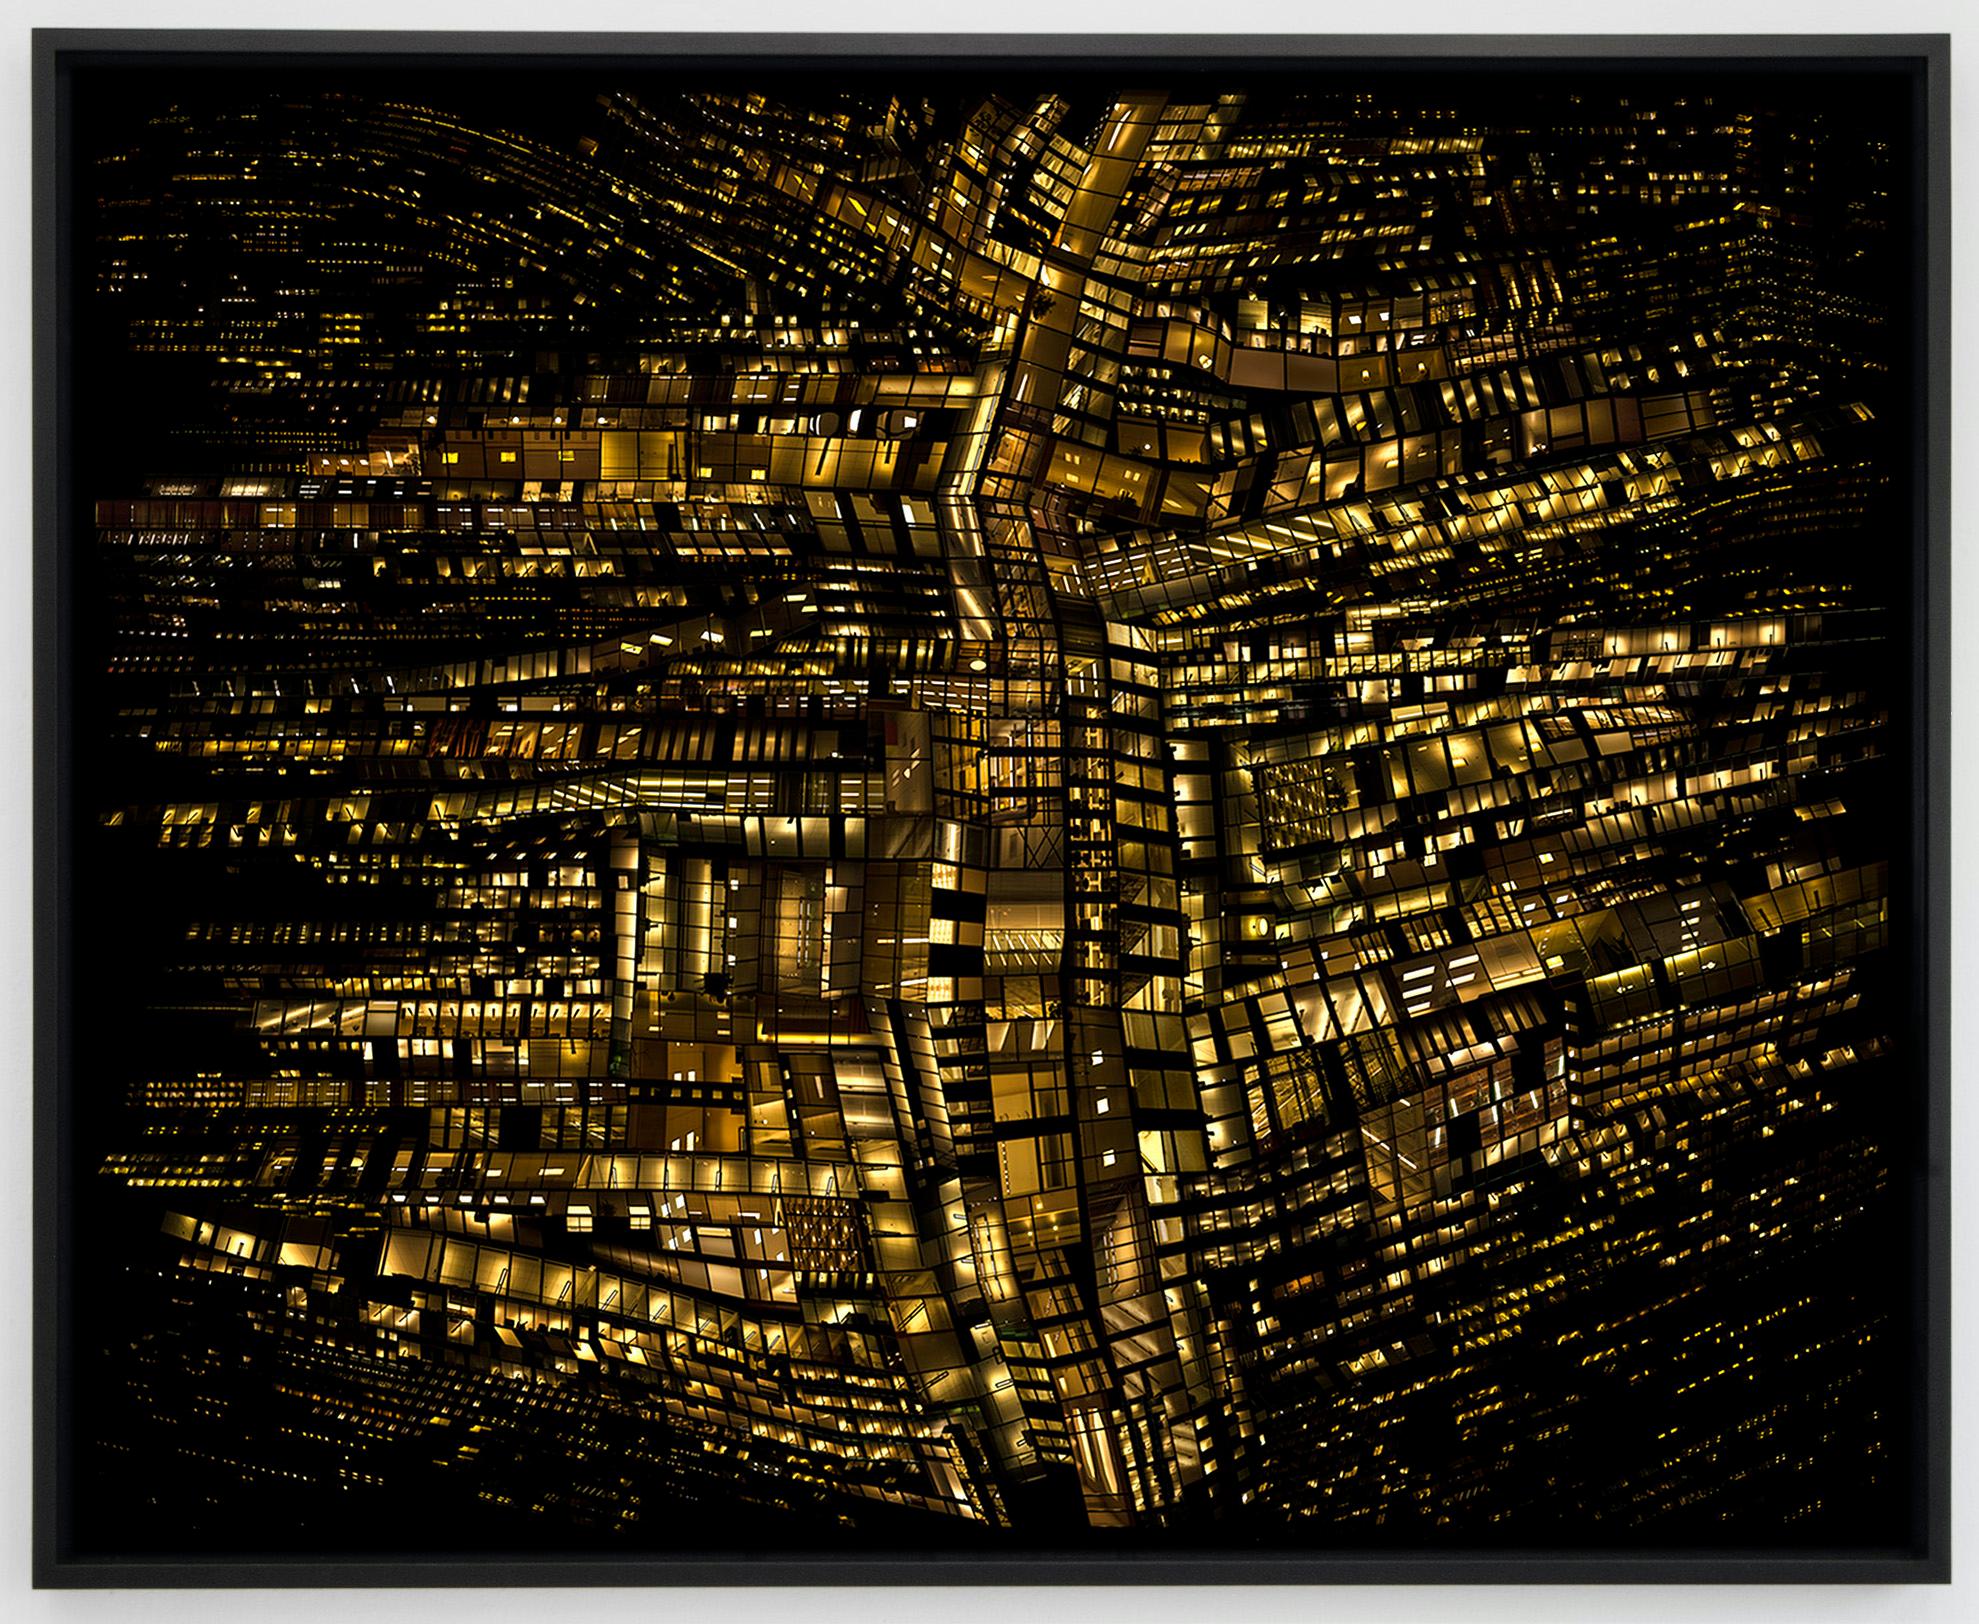 Hubert Blanz Landscape Photograph - Urban Codes 03 - Contemporary Abstract Architectural City Photography By Night